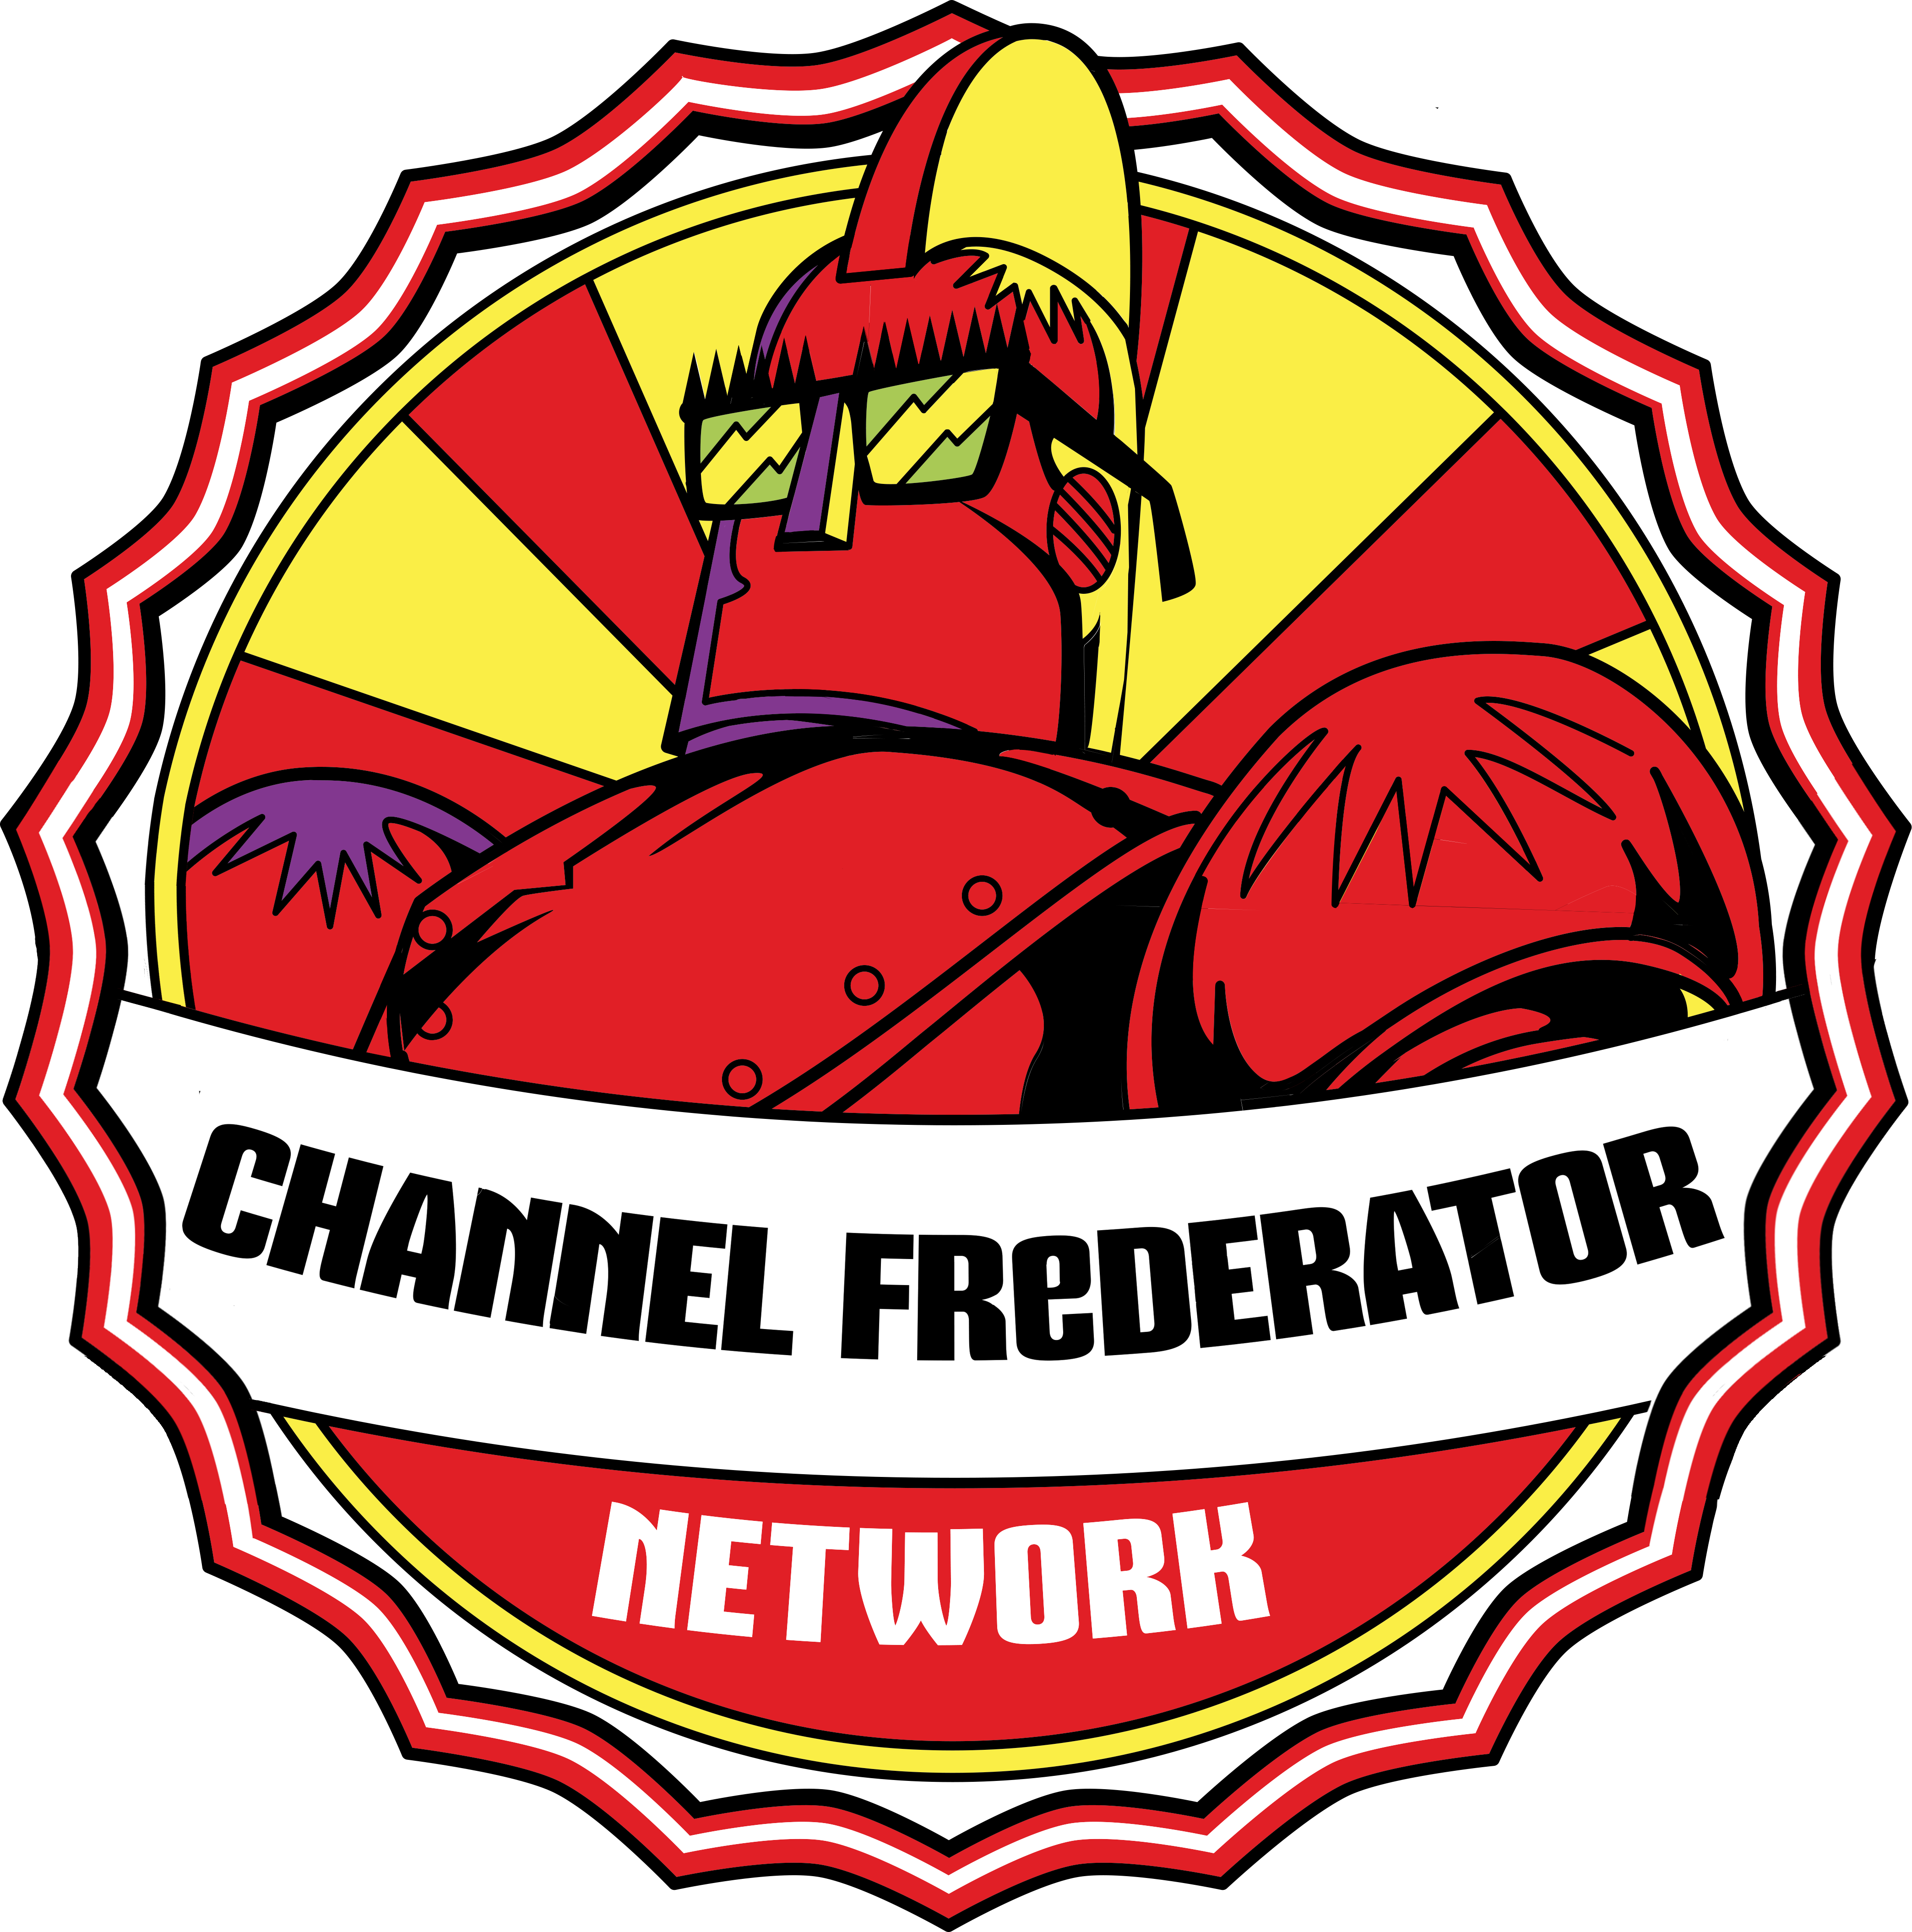 Channel Frederator Network